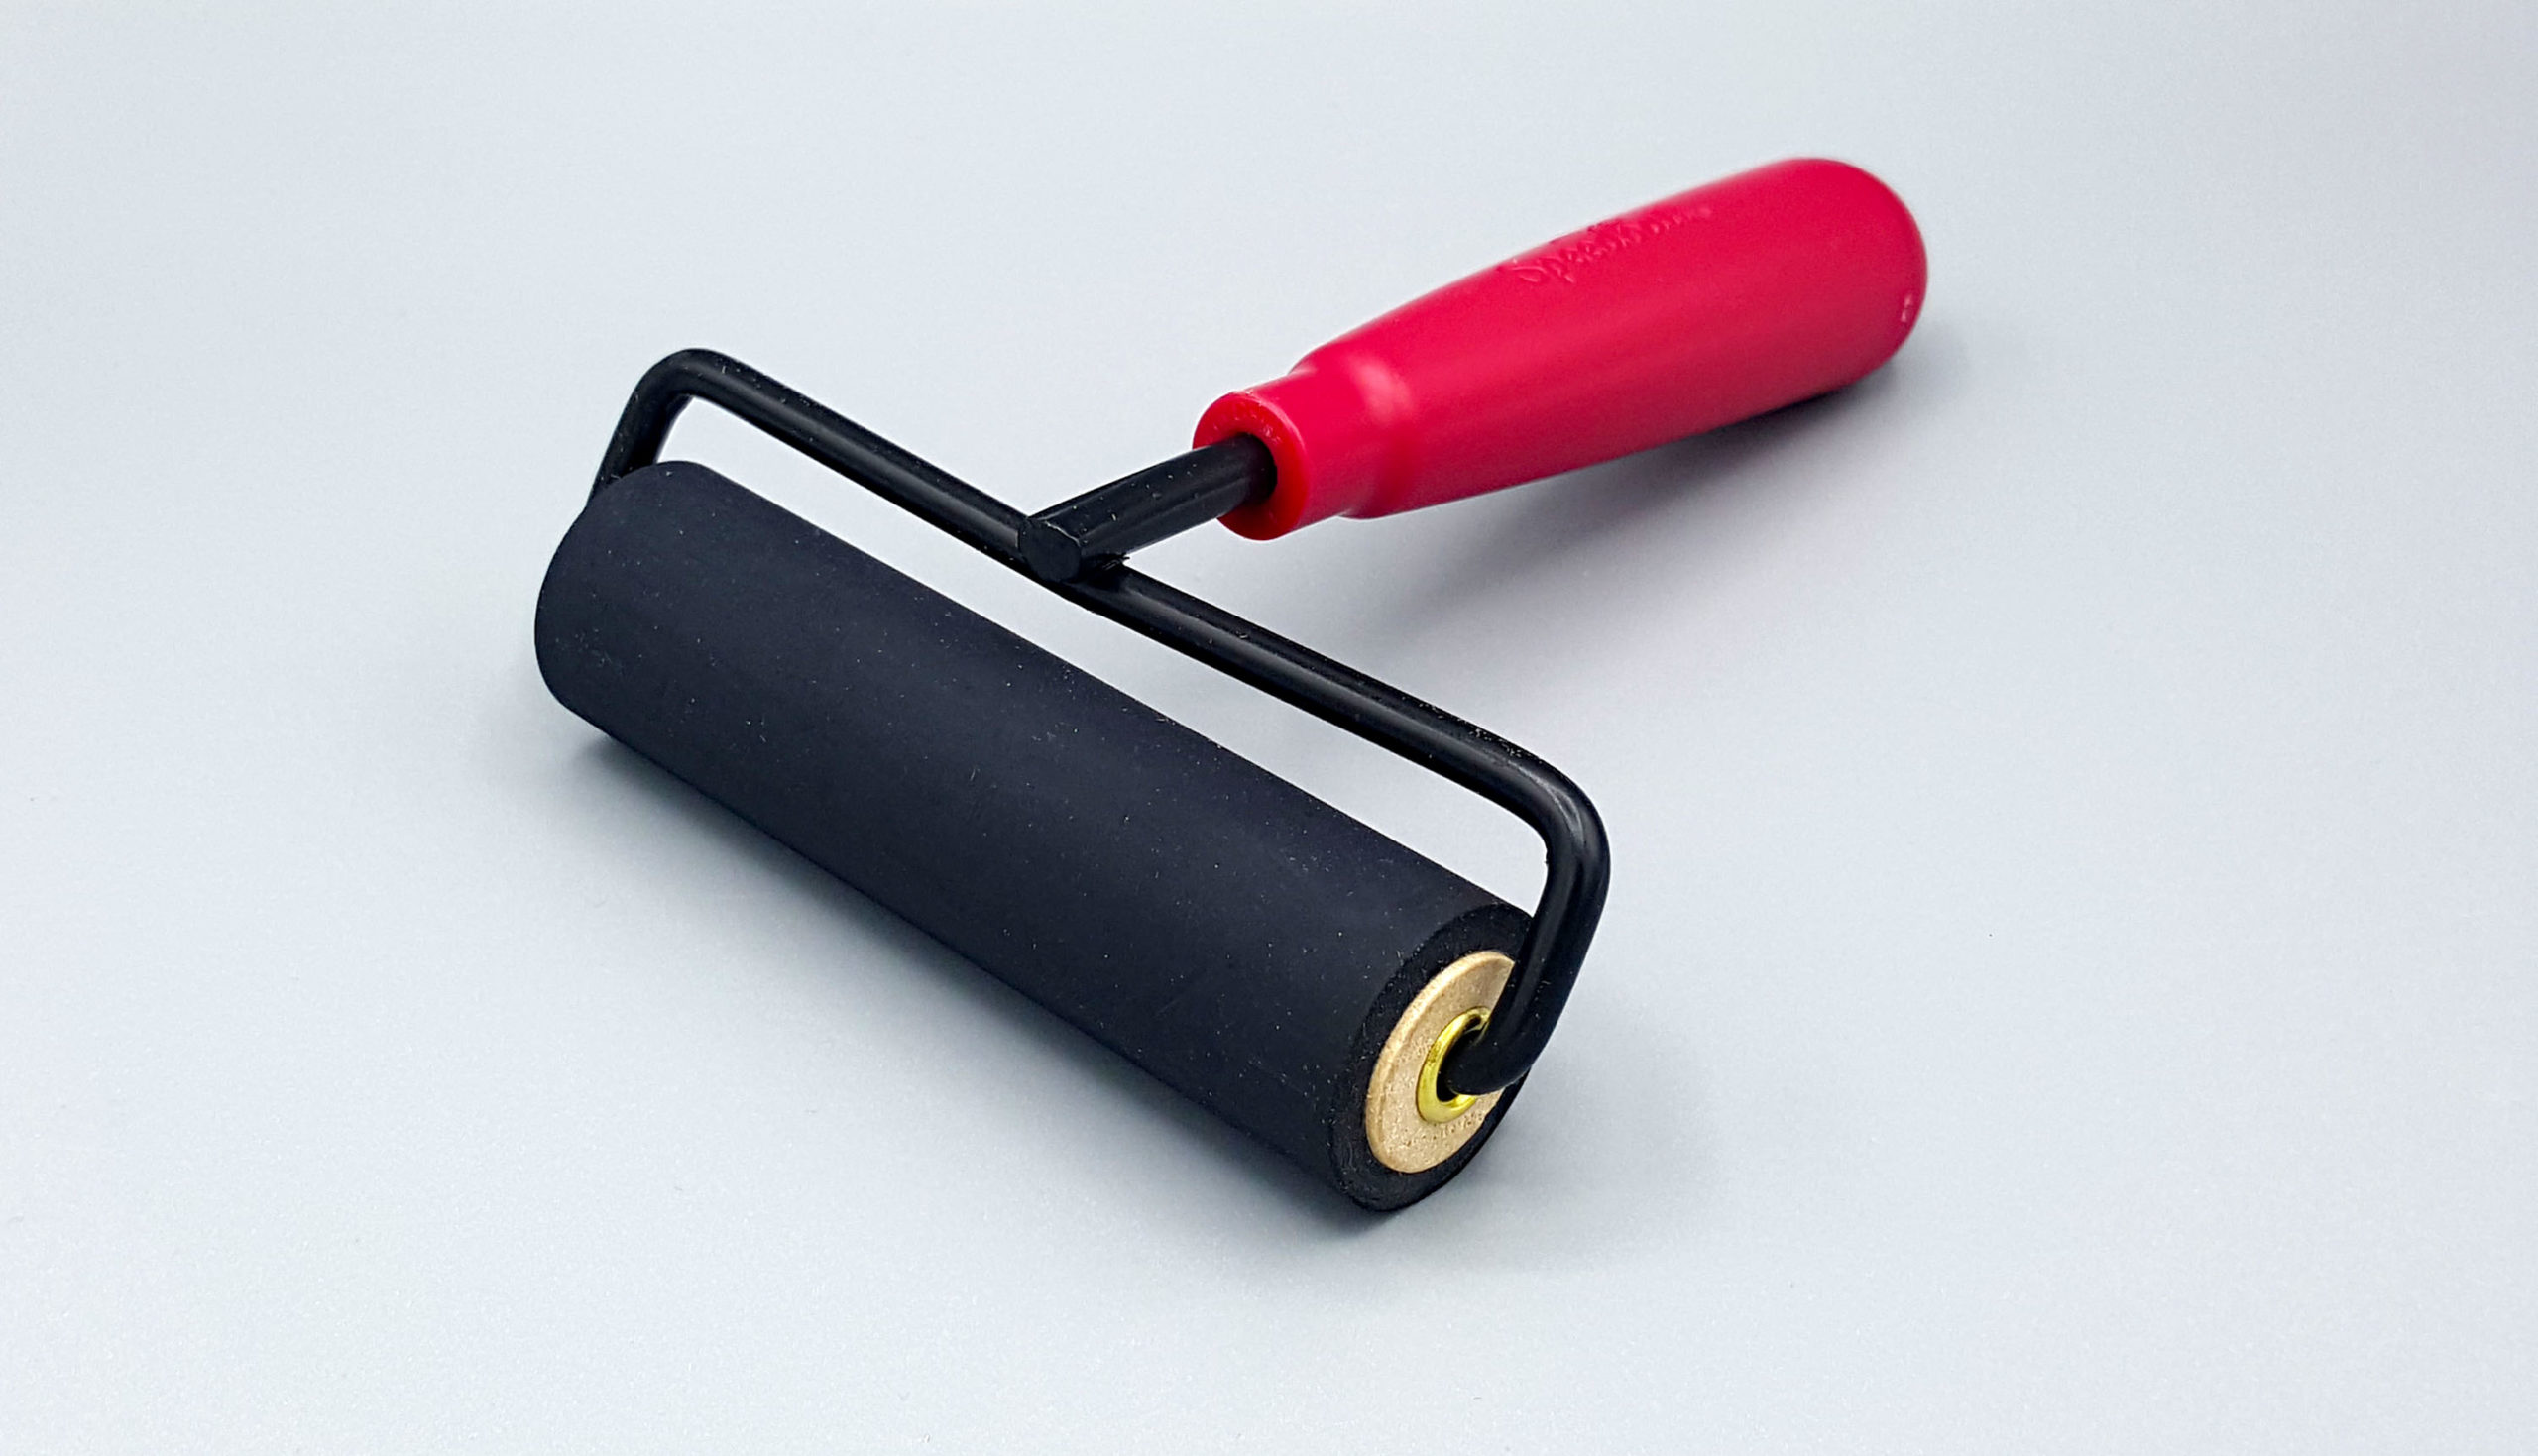 Japanese Soft Rubber Roller / Brayer - Rollers & Brayers - Relief